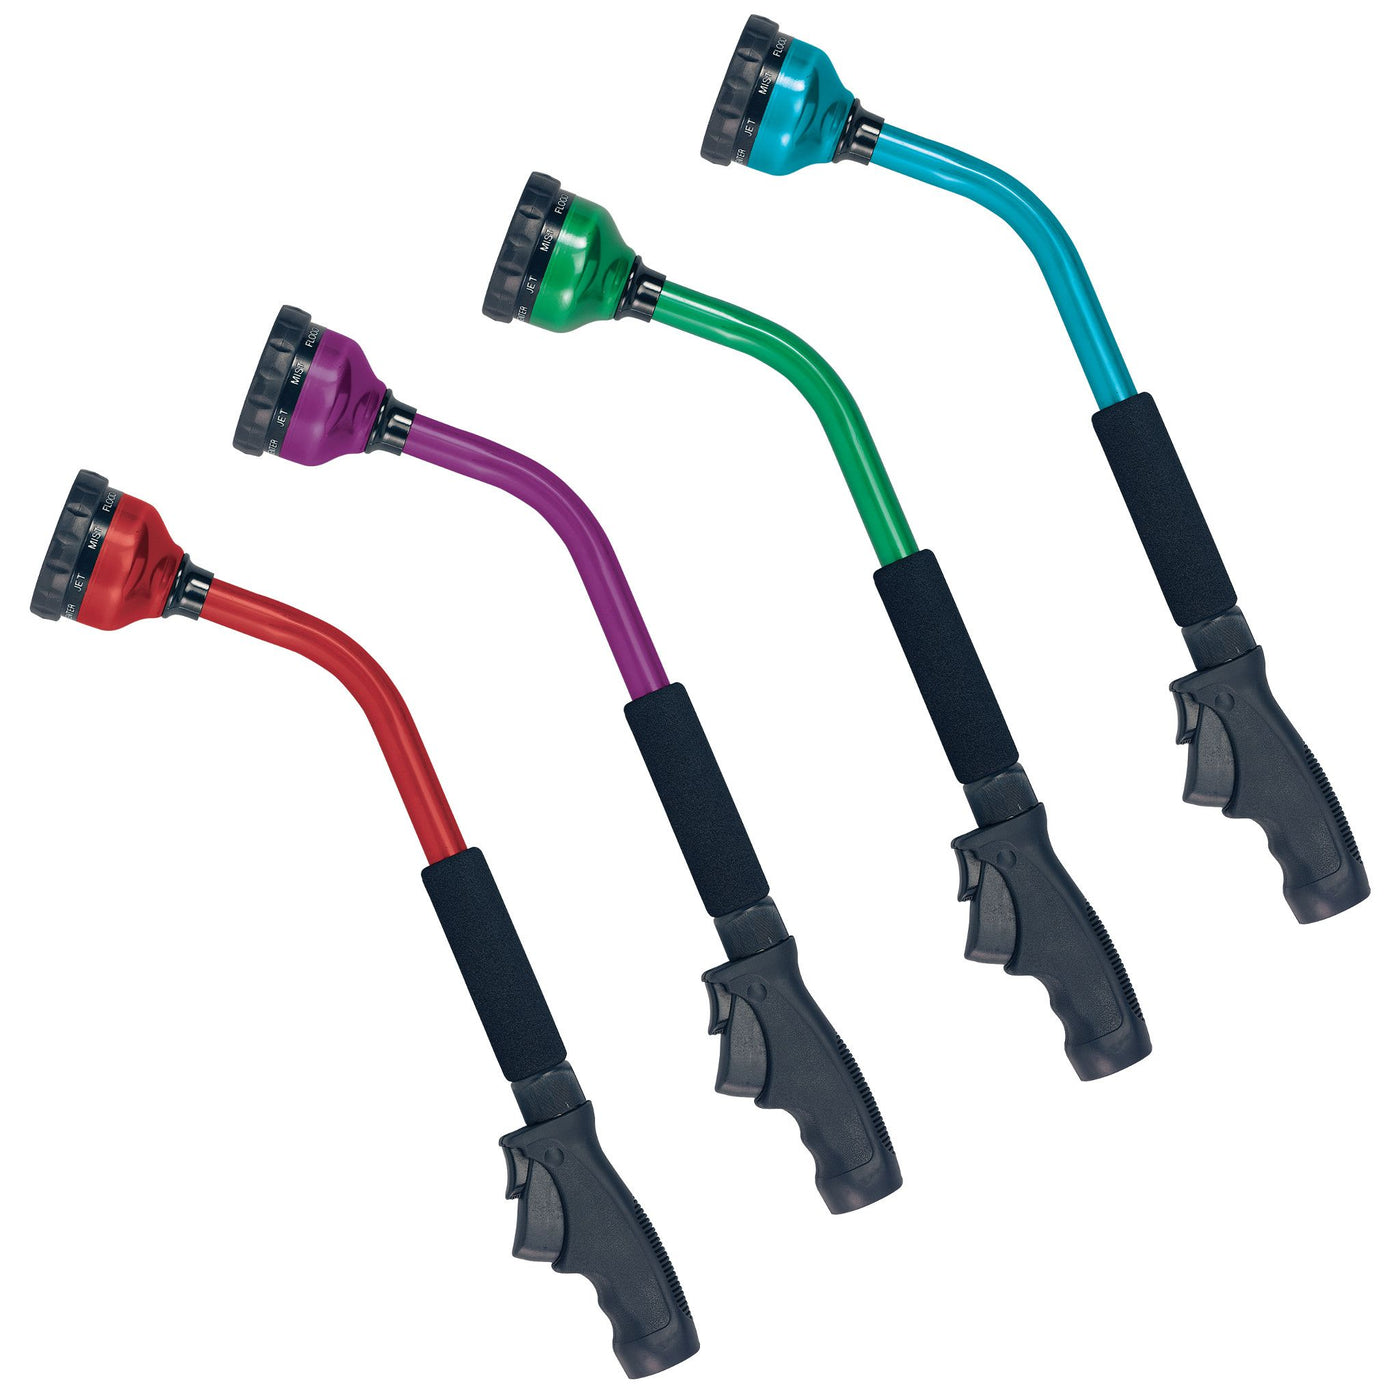 18-inch 9-pattern ratchet front trigger wands displayed in red, purple, green and blue. 